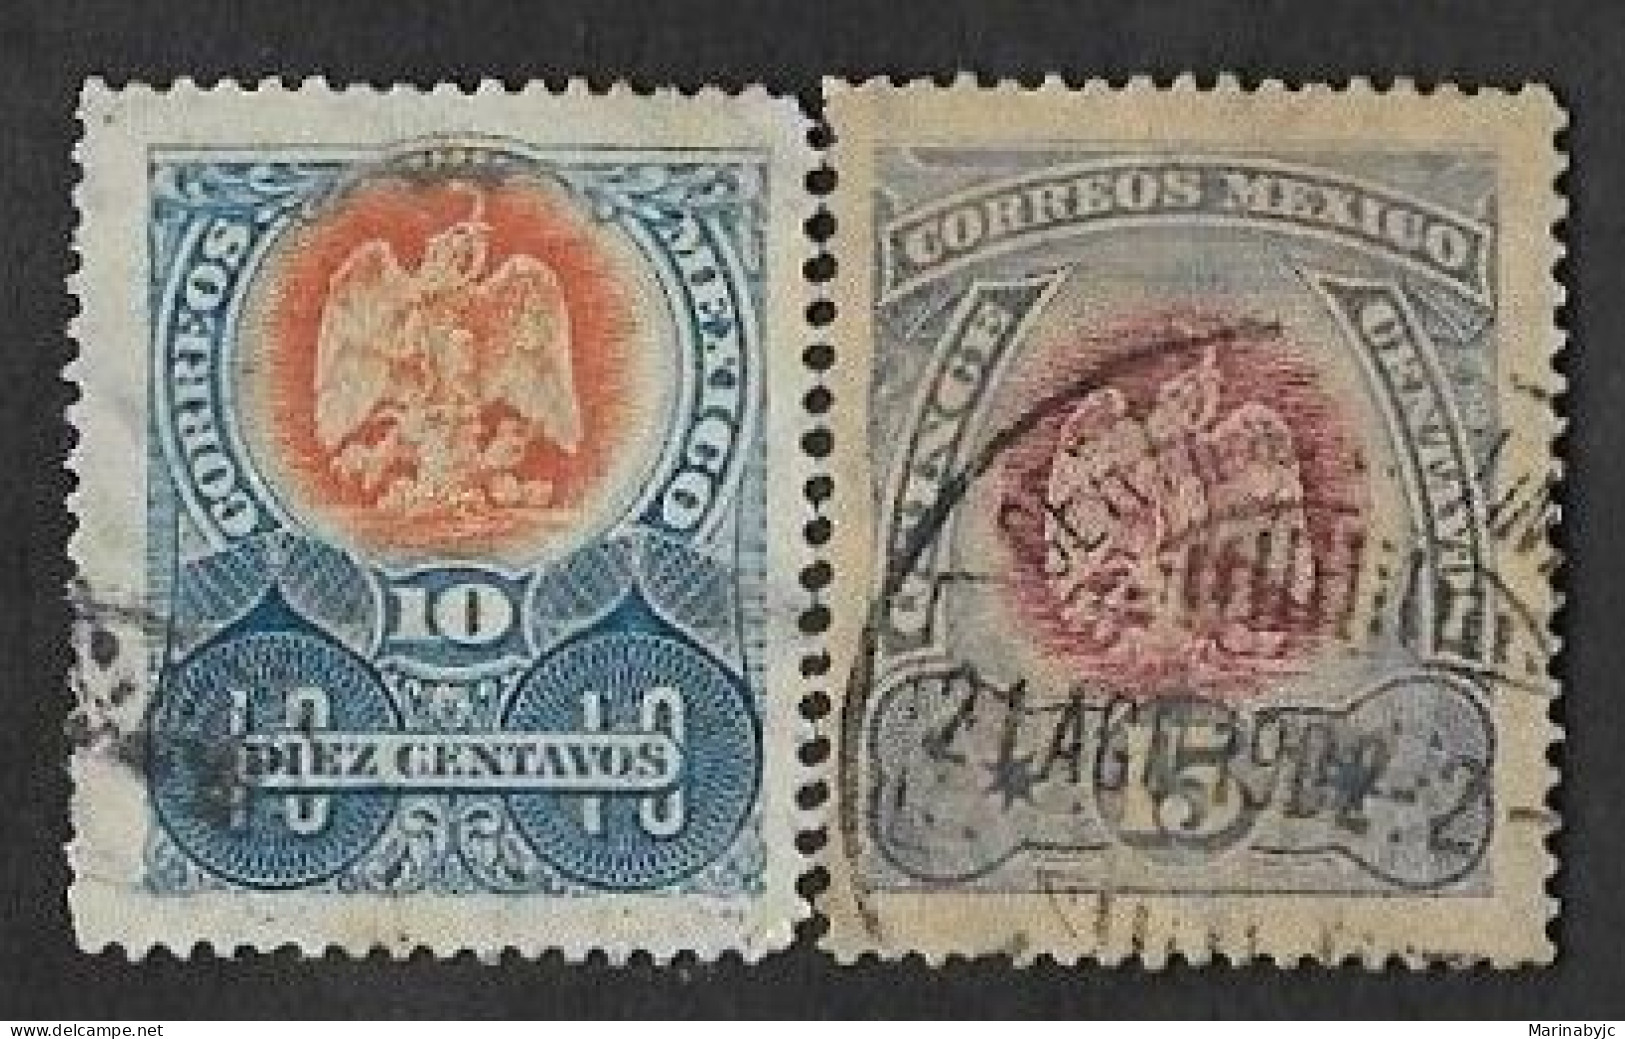 SE)1899 MEXICO COAT OF ARMS, AGUILITA 10C SCT 298 & 15C SCT 299, USED - Mexiko